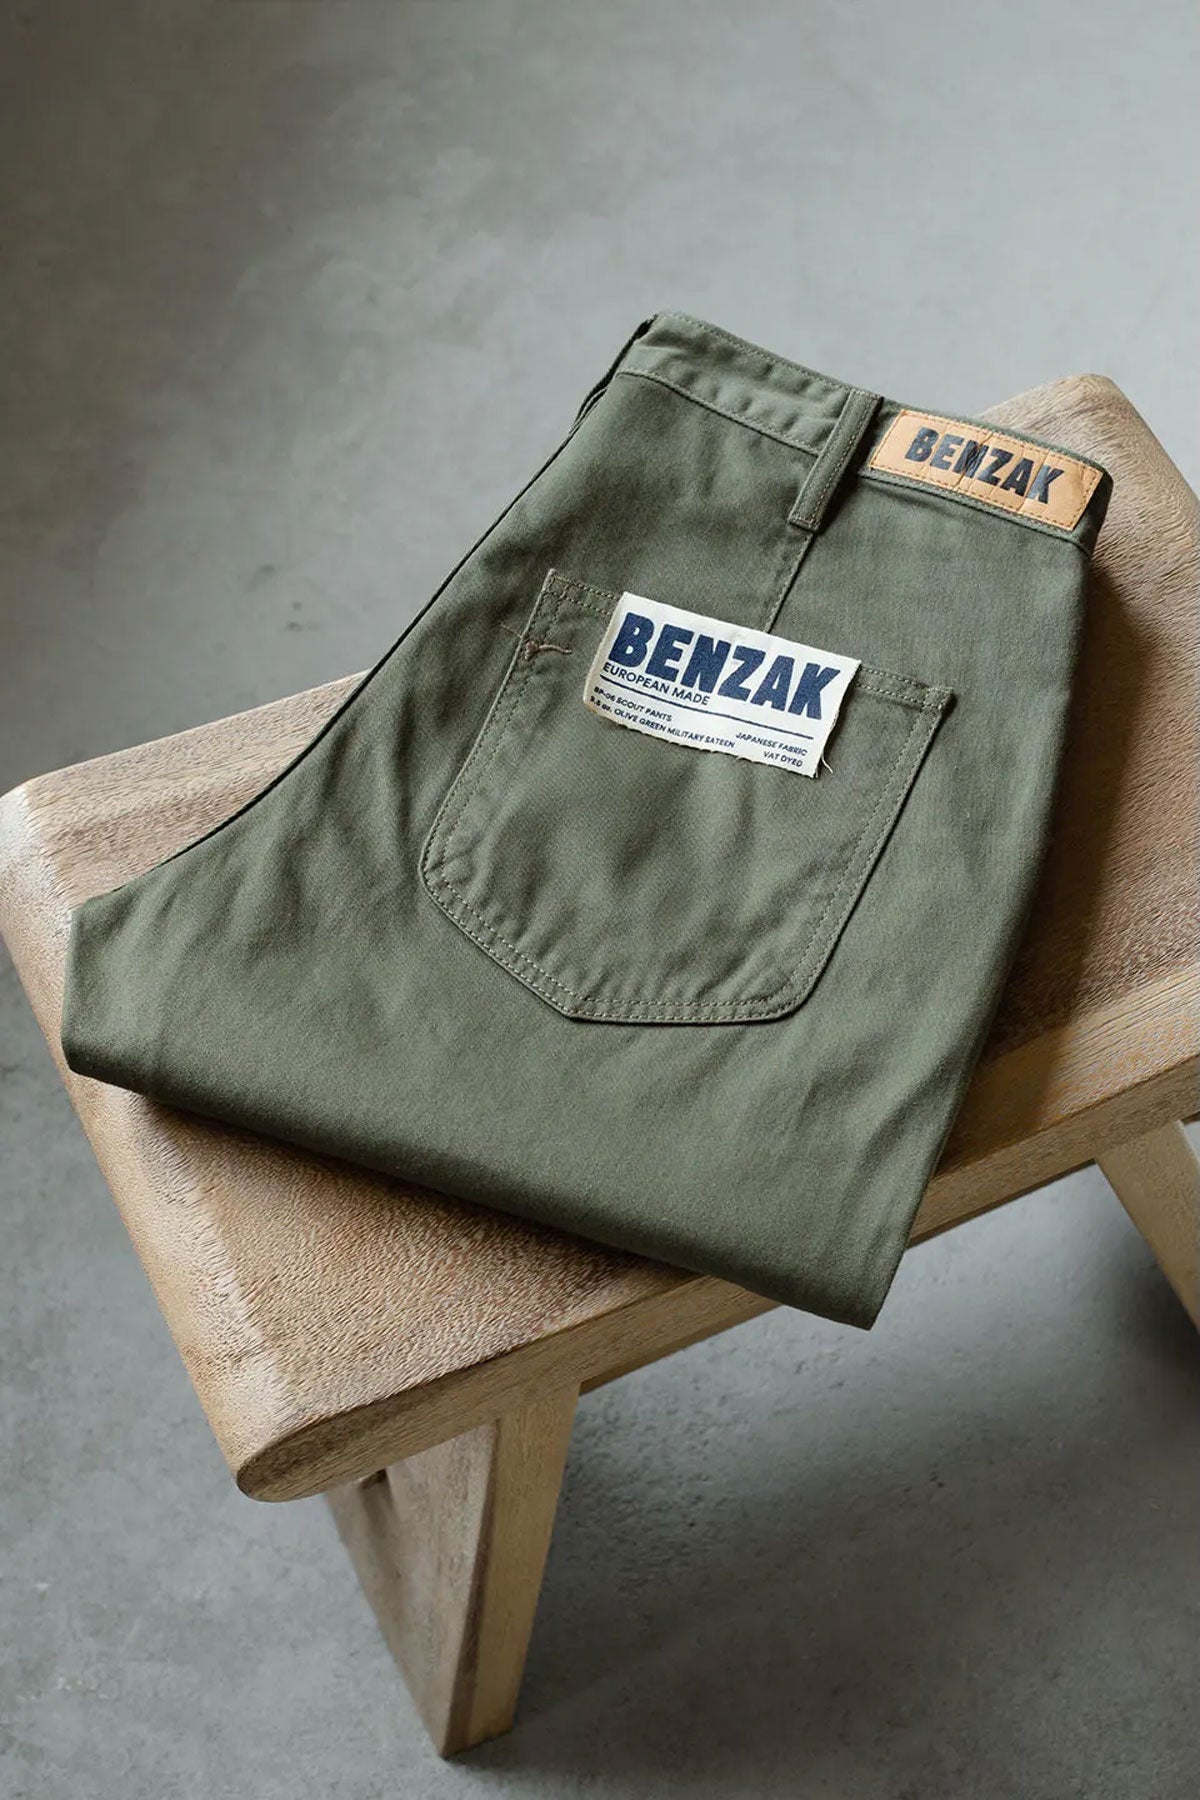 Benzak - BP-06 Scout Pants 9.5 oz. olive green military sateen